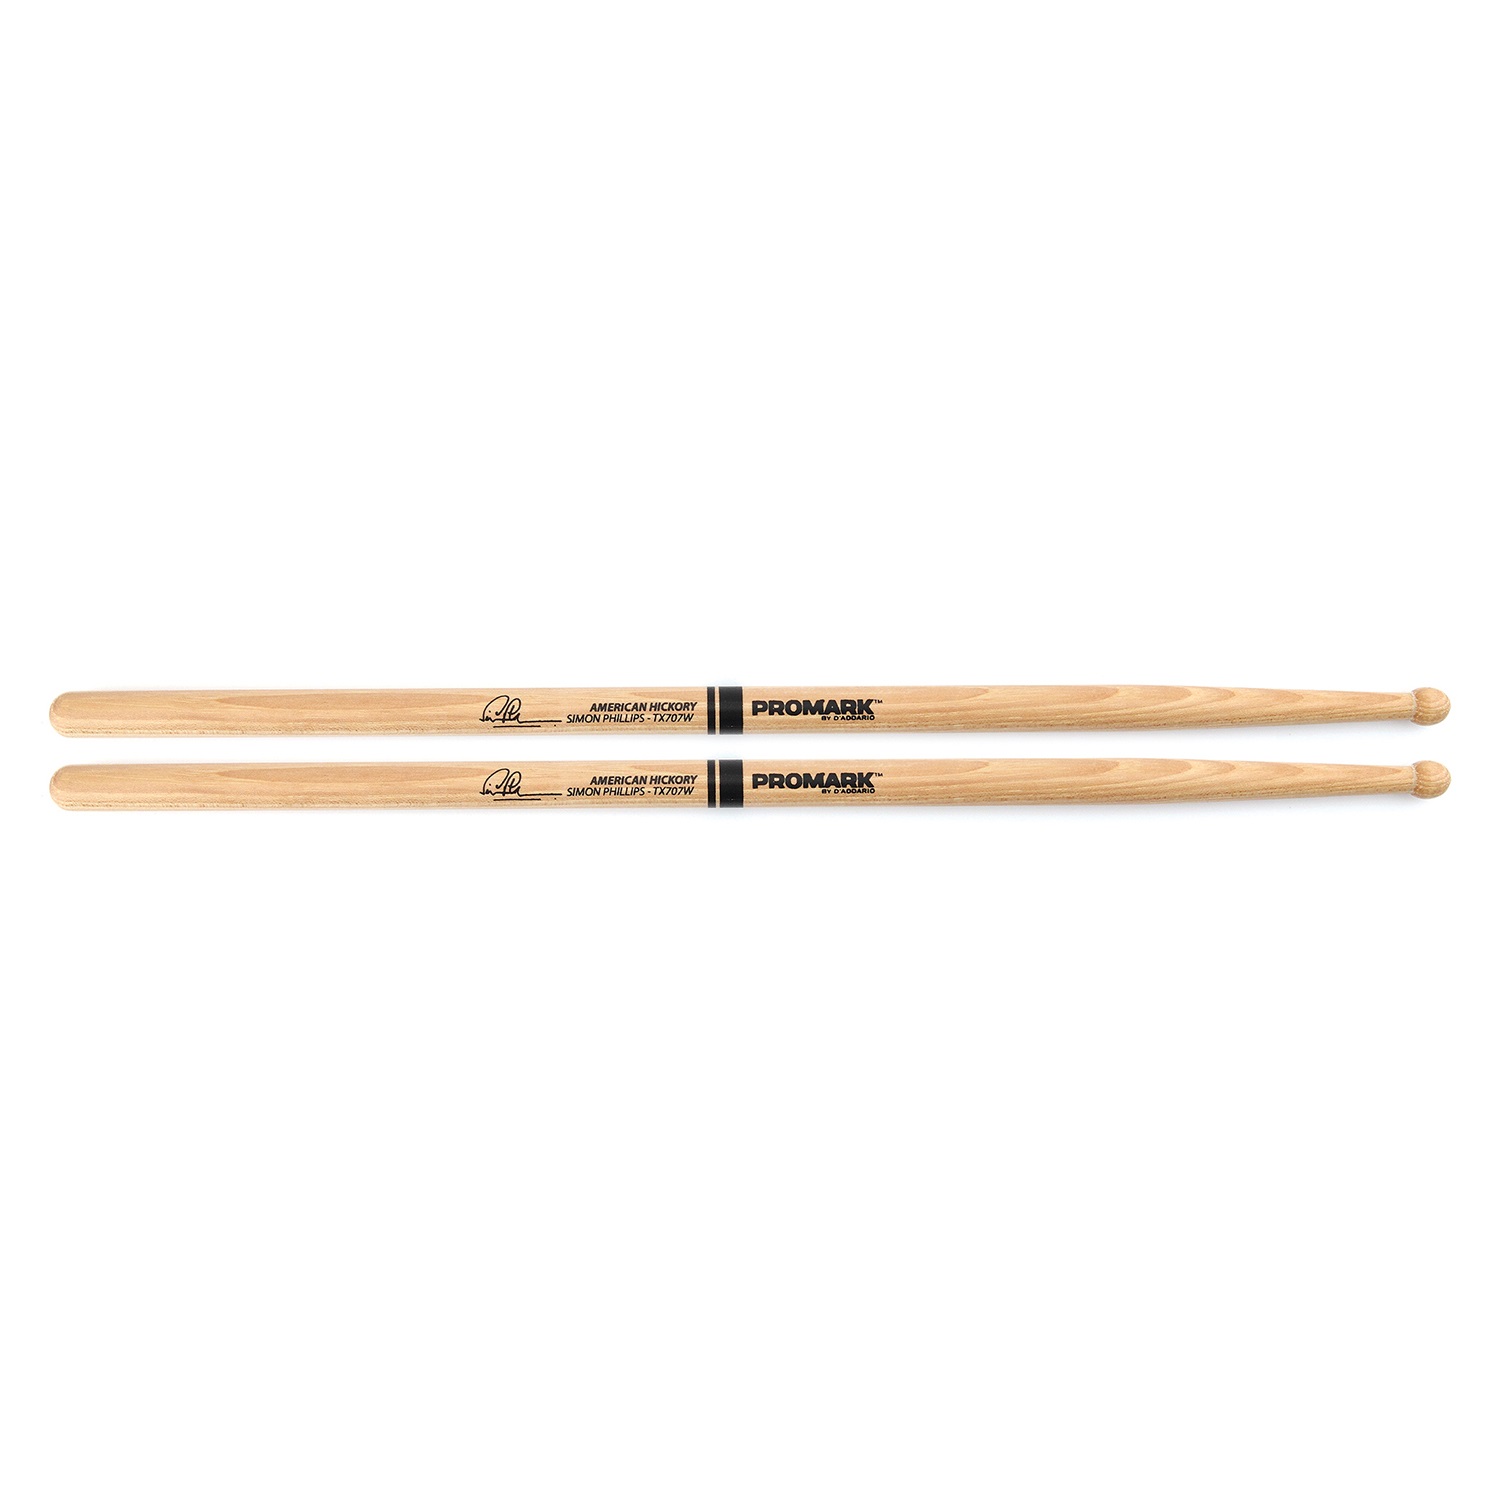 An image of Promark Hickory 707 Simon Phillips Wood Tip Drumstick Pair